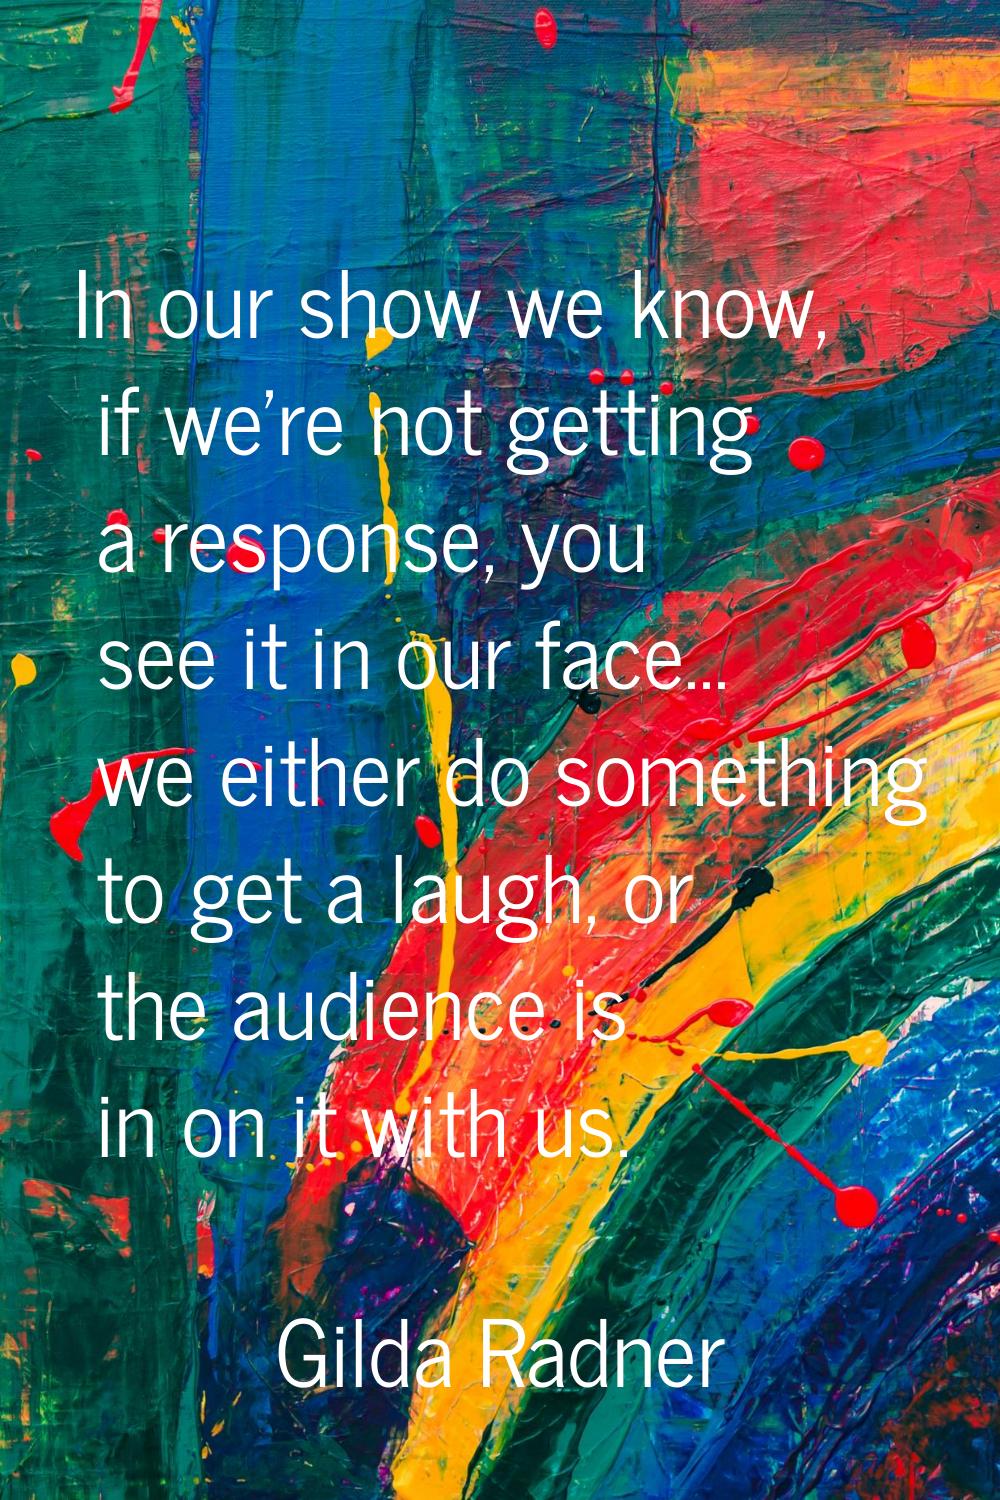 In our show we know, if we're not getting a response, you see it in our face... we either do someth